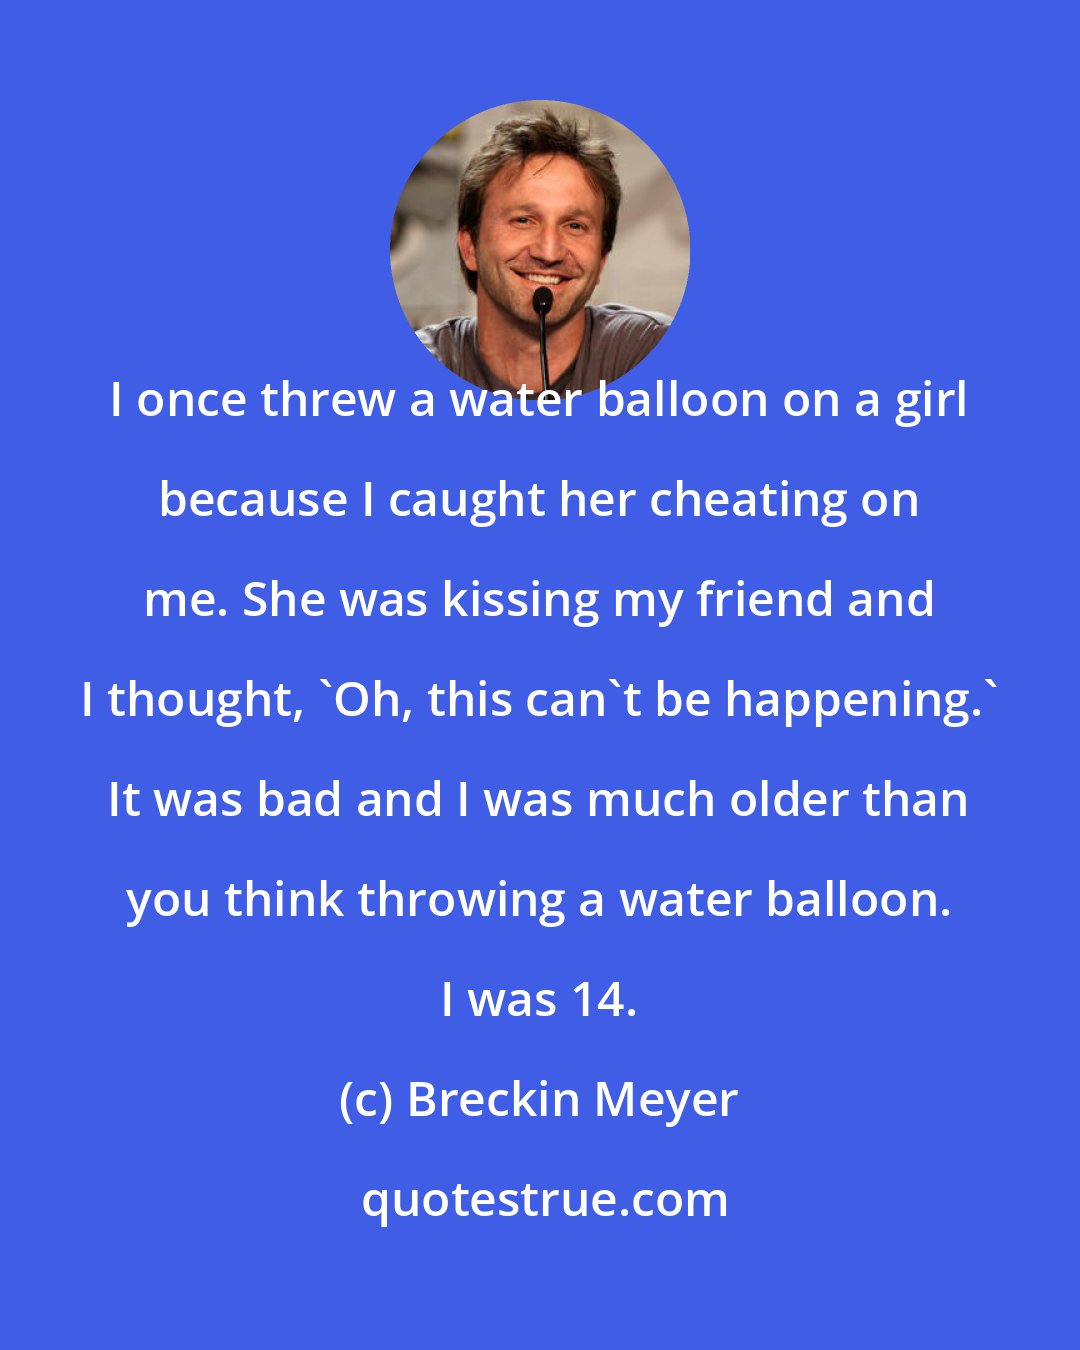 Breckin Meyer: I once threw a water balloon on a girl because I caught her cheating on me. She was kissing my friend and I thought, 'Oh, this can't be happening.' It was bad and I was much older than you think throwing a water balloon. I was 14.